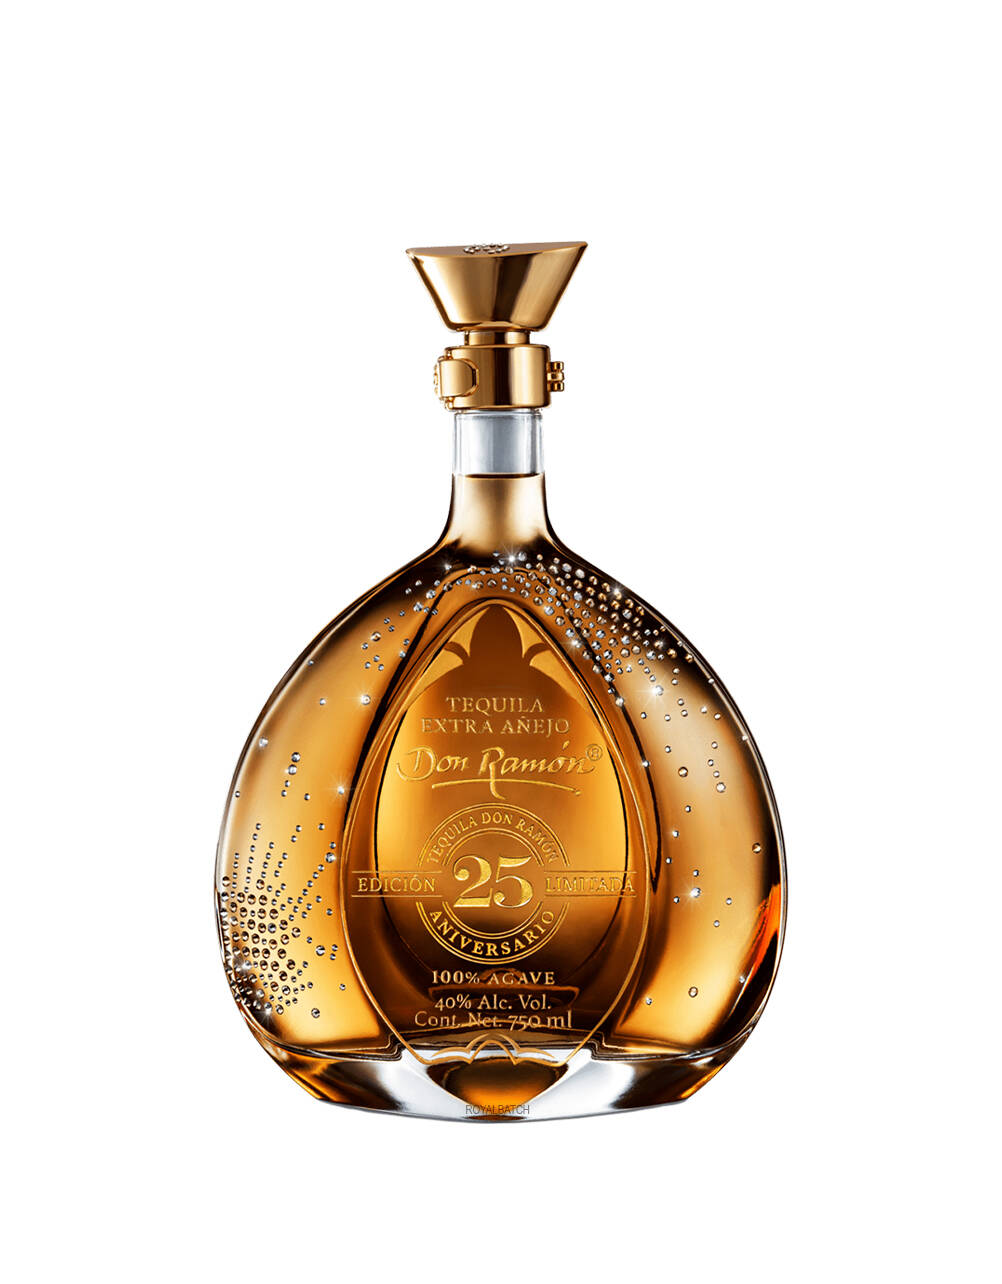 Don Ramon 25 Year Anniversary Extra Anejo Limited Edition Tequila